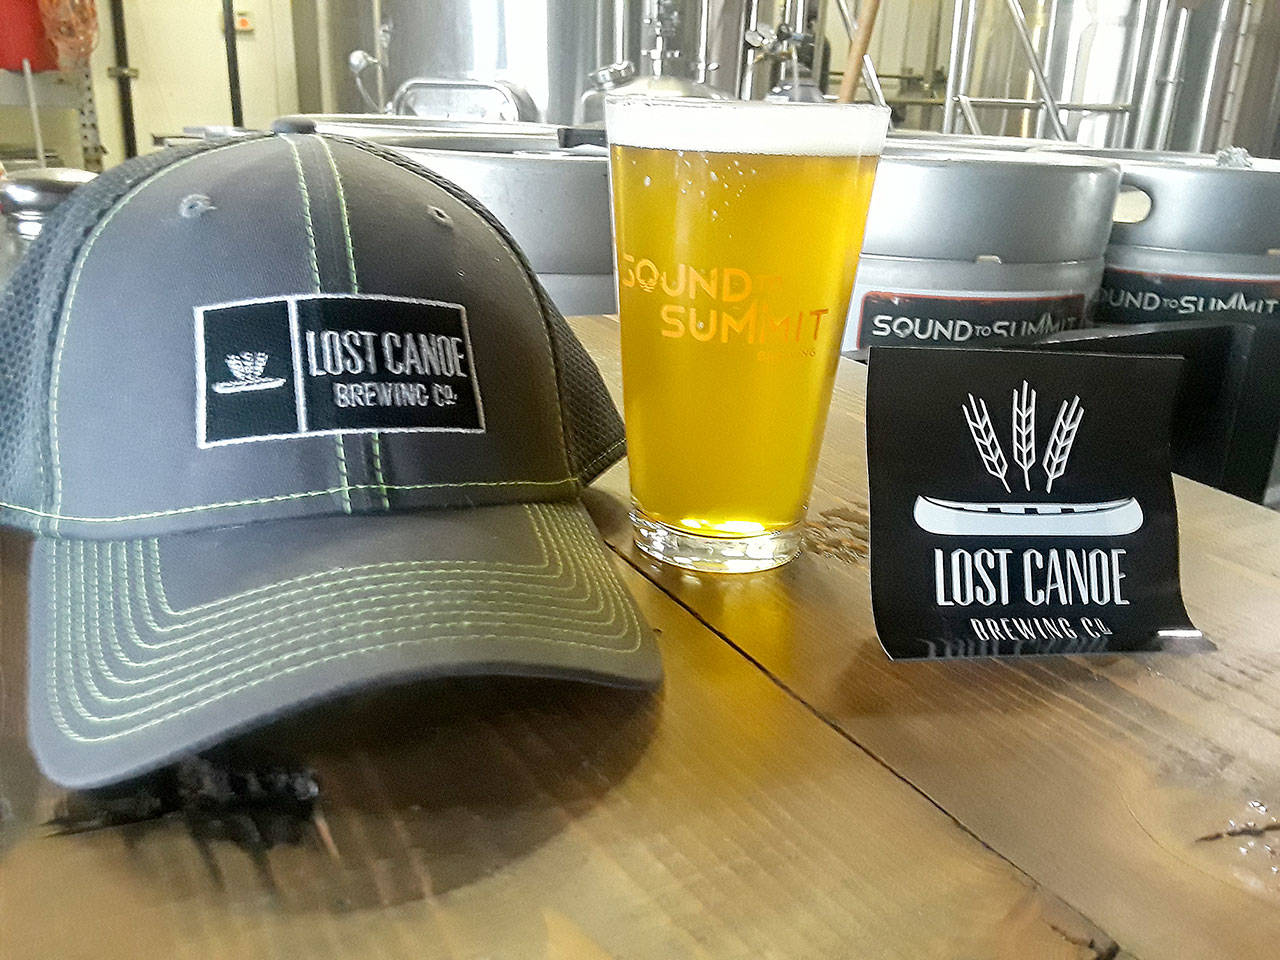 Cucumber Kolsch is available at both Lost Canoe Brewing and Sound to Summit Brewing in Snohomish. (Photo by Aaron Swaney)